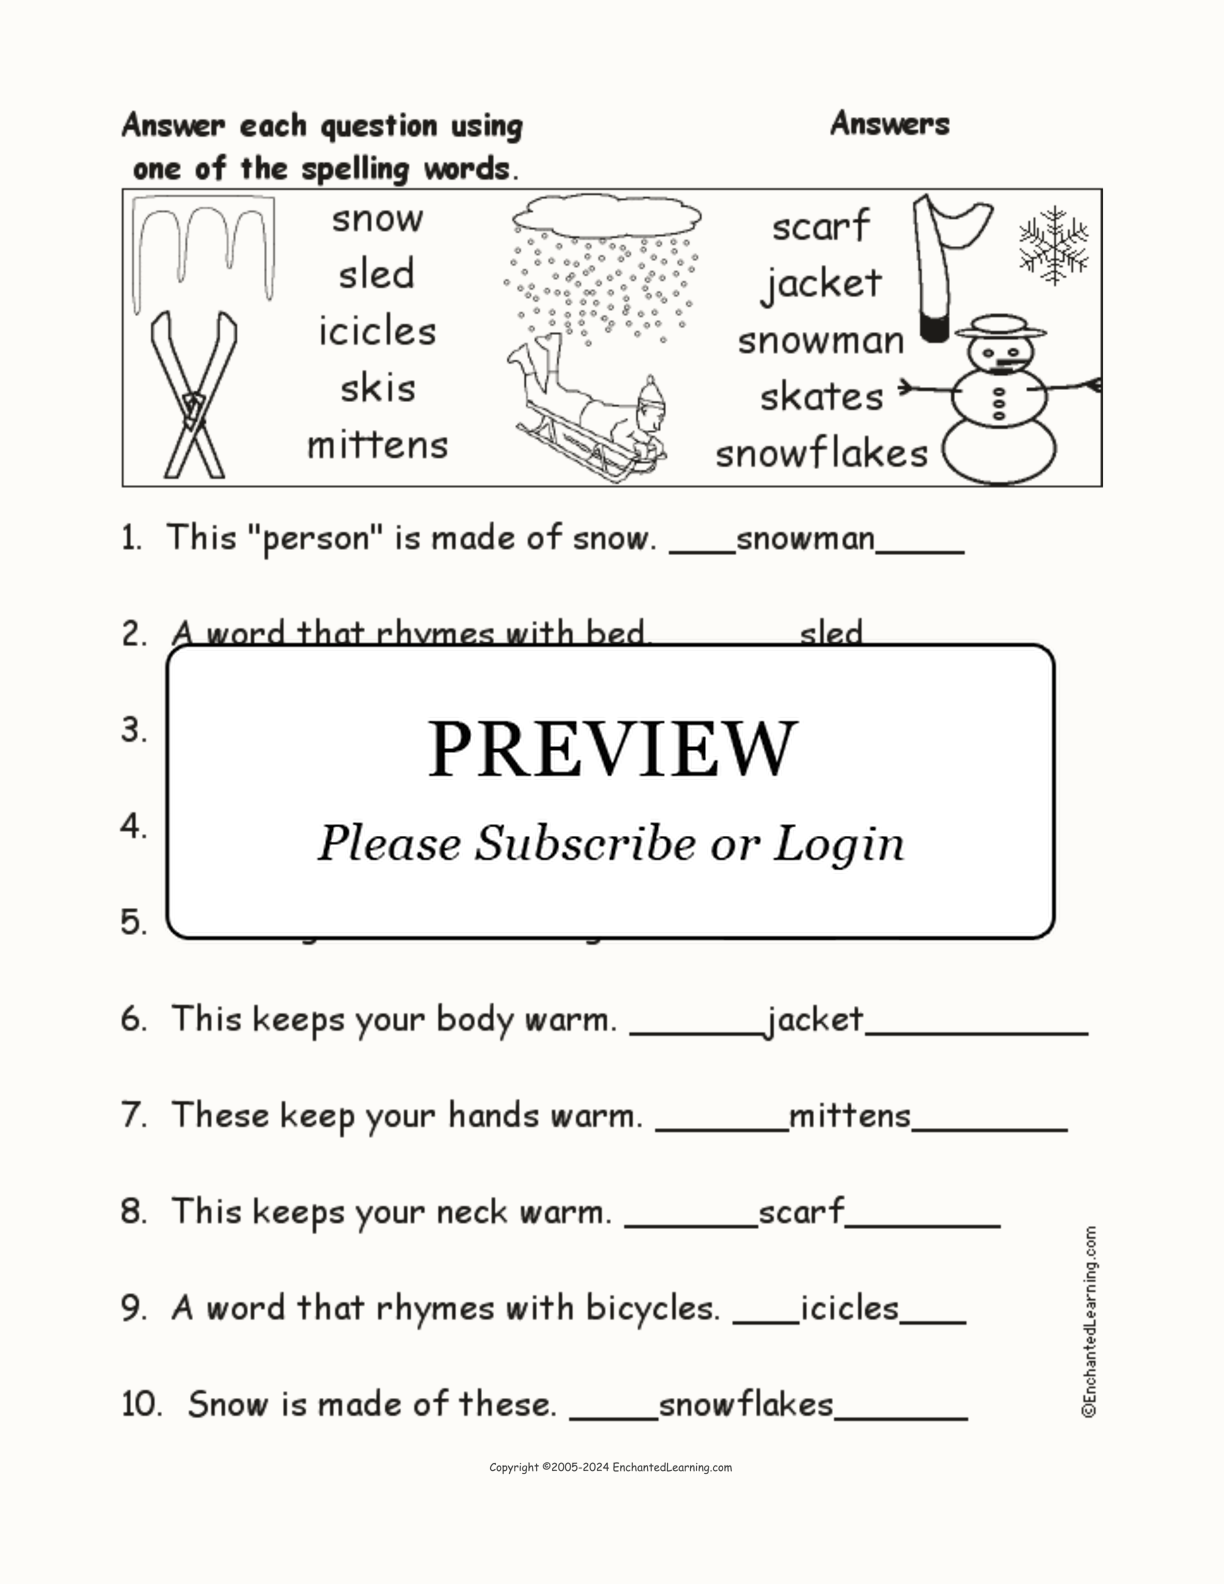 Winter Spelling Word Questions interactive worksheet page 2